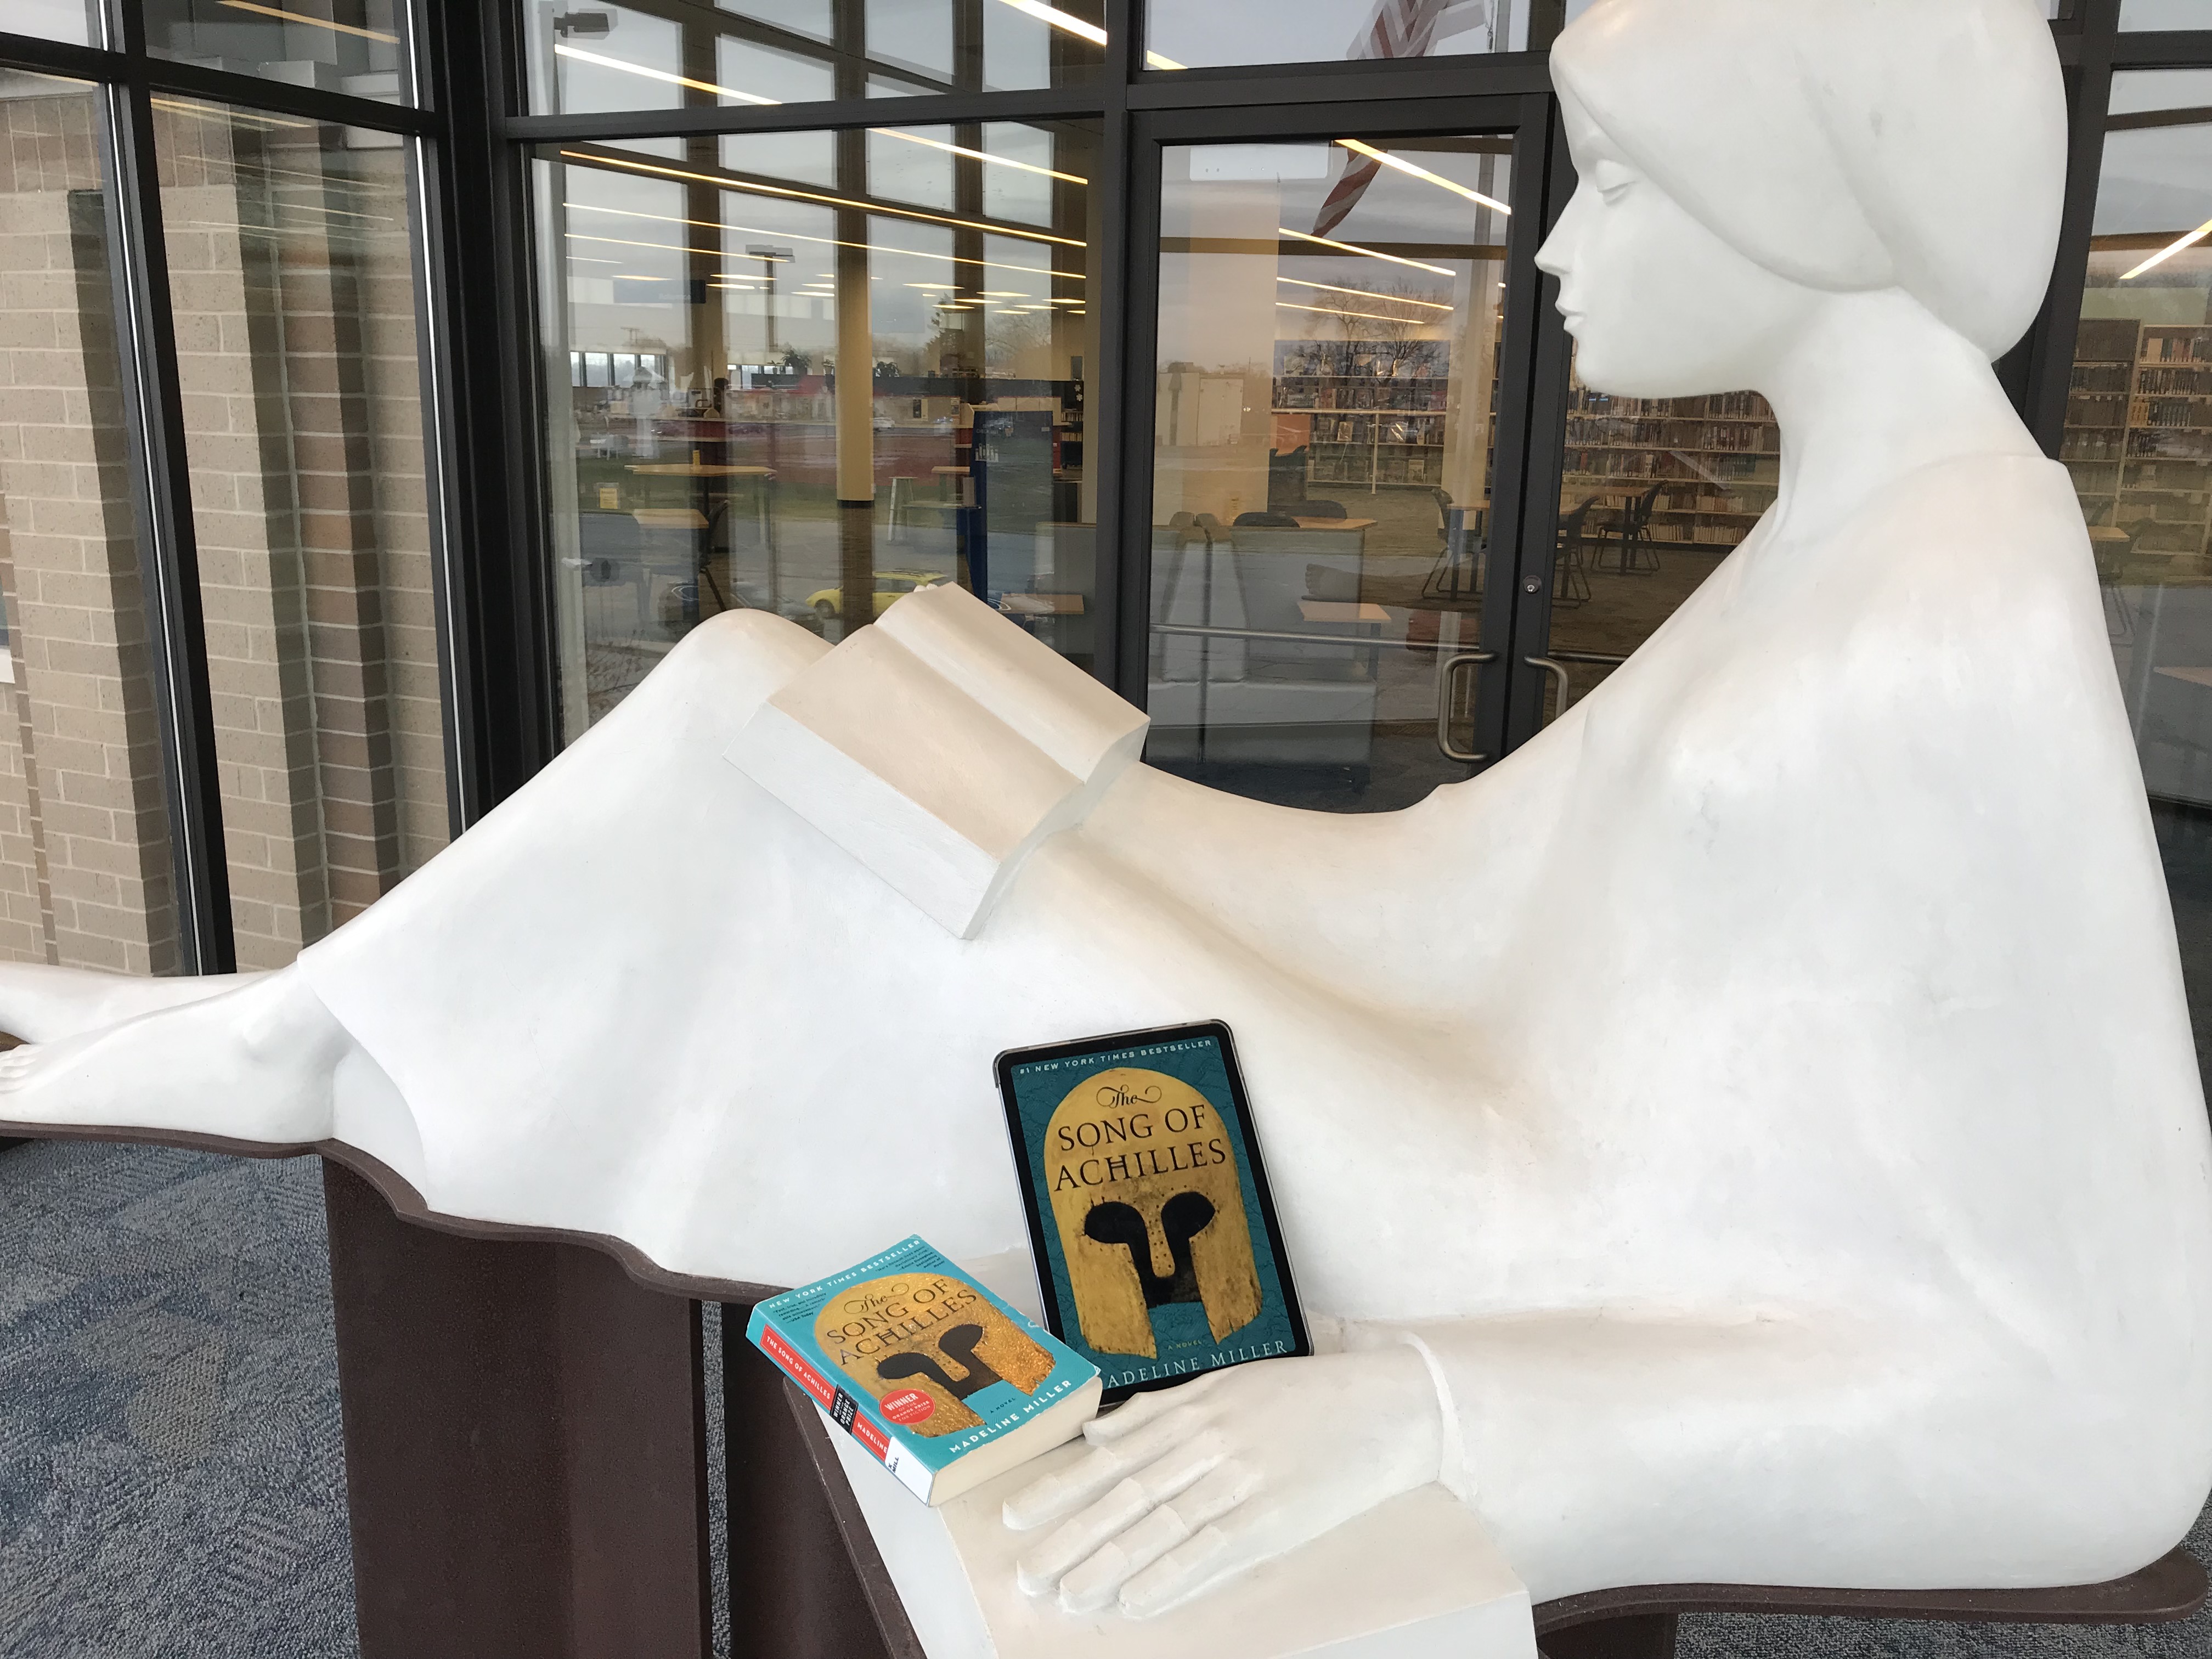 The Reader statue with a paper copy of a book and an ebook on a tablet